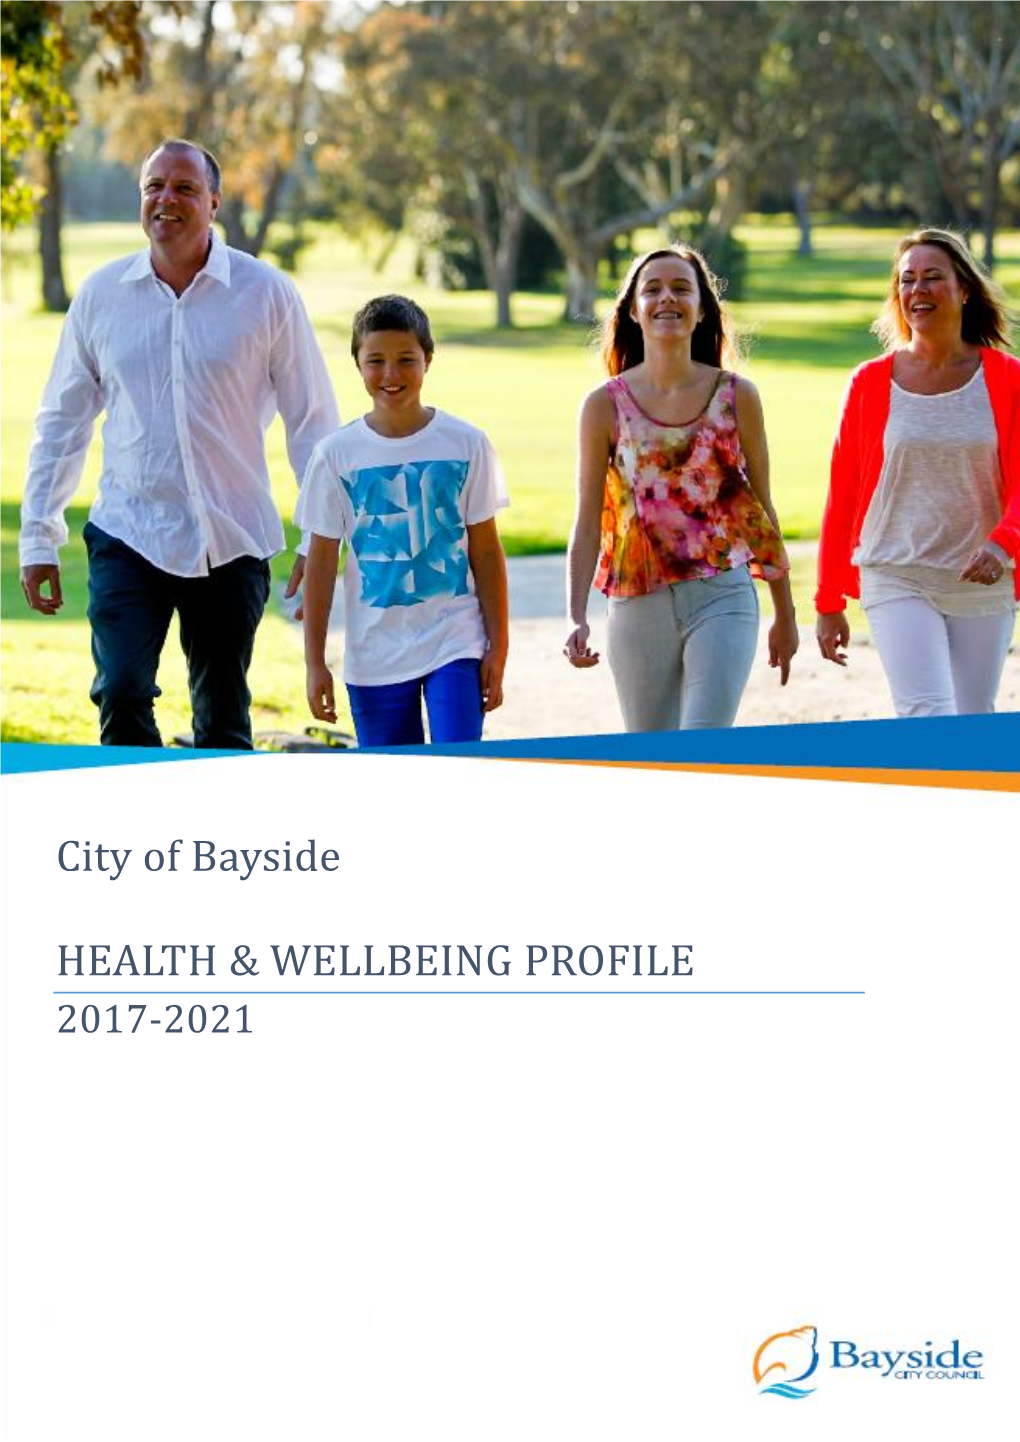 City of Bayside Health and Wellbeing Profile 2017-2021